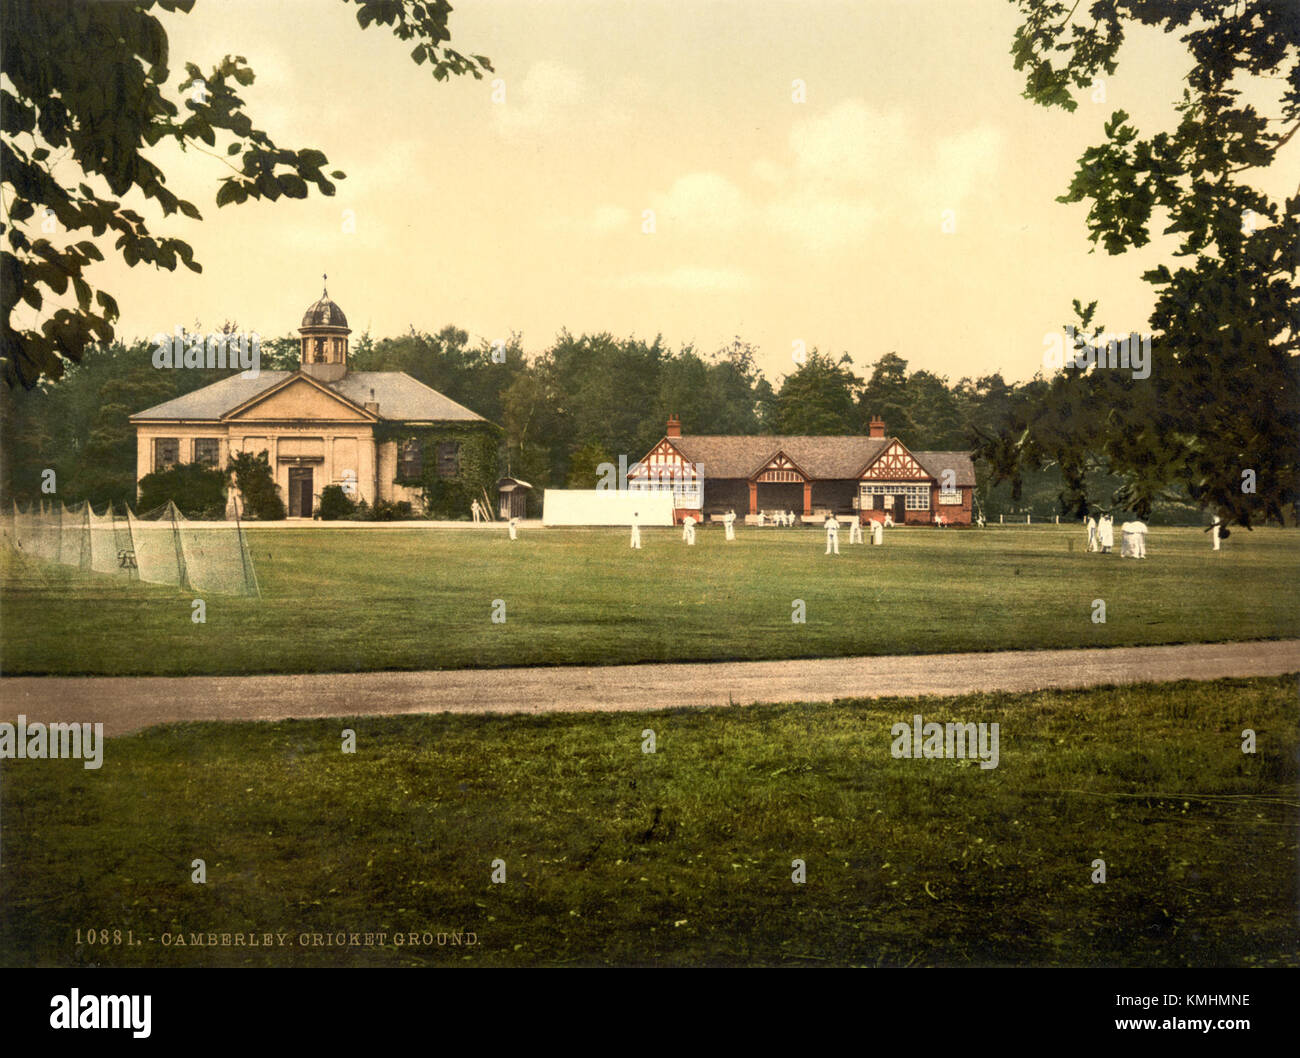 Royal Military College cricket grounds, Sandhurst, Camberley, Surrey, England, ca. 1895 Stock Photo